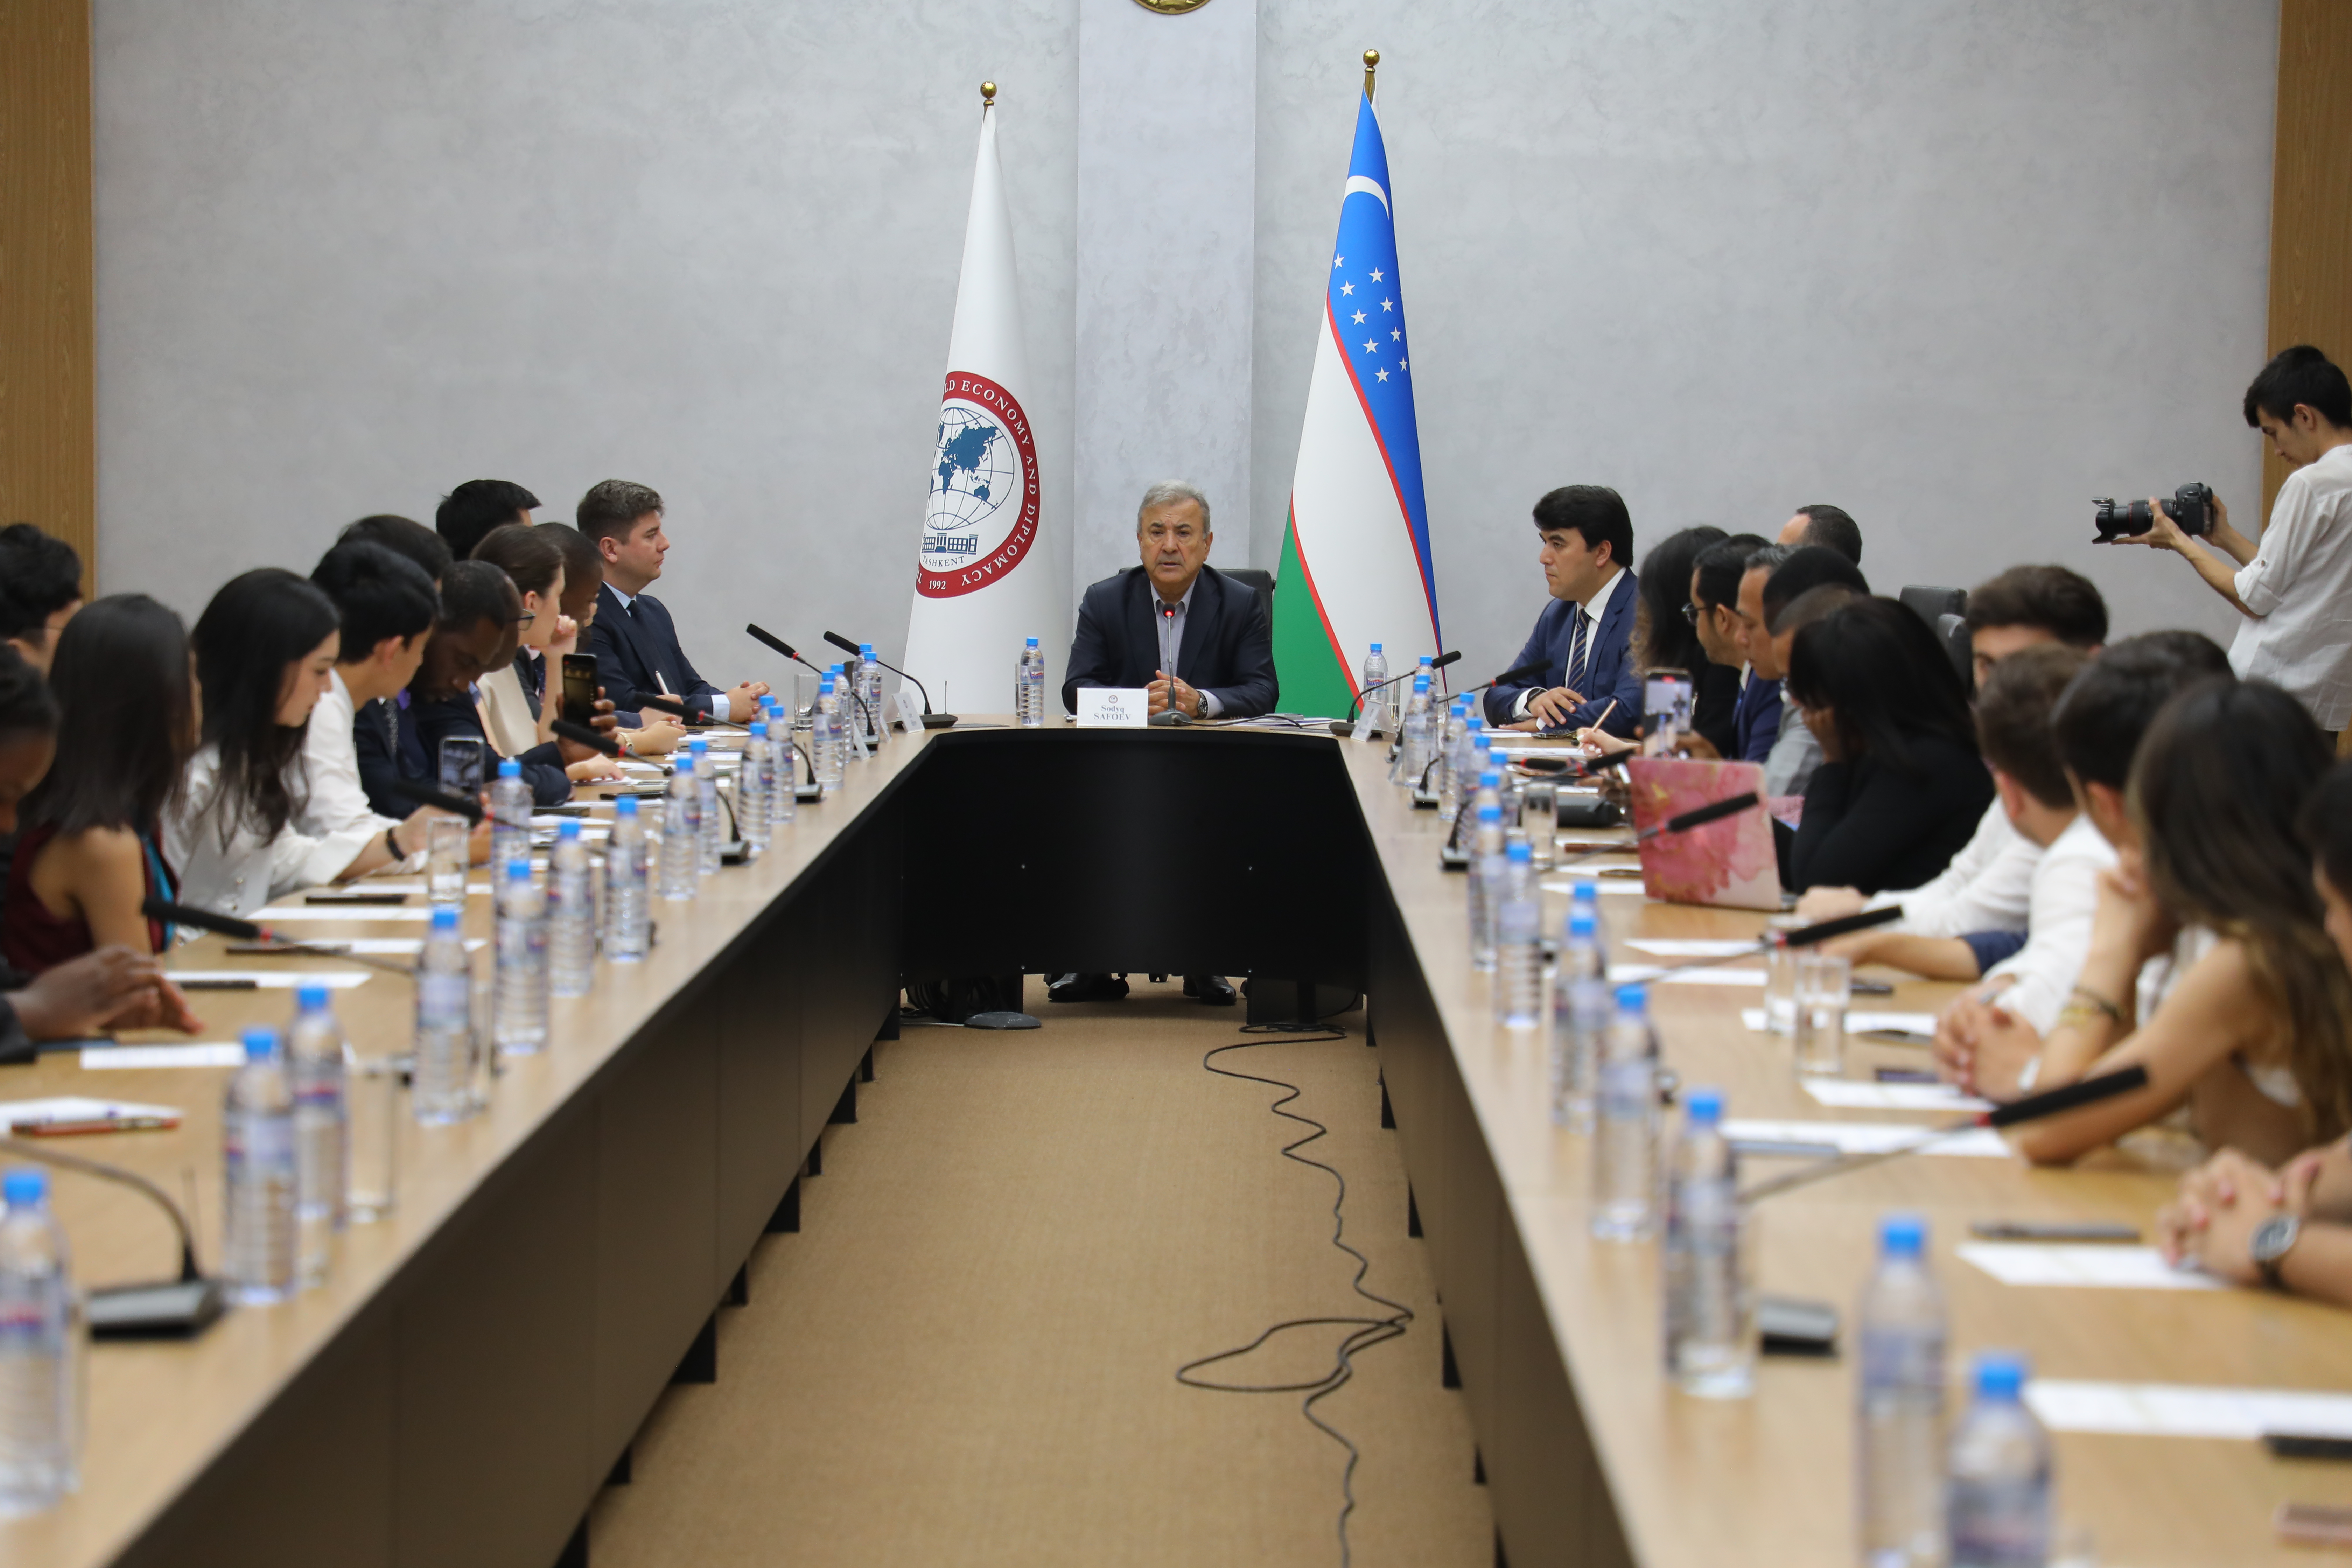 Participants of the “Summit of Young Diplomats” visited the University of World Economy and Diplomacy